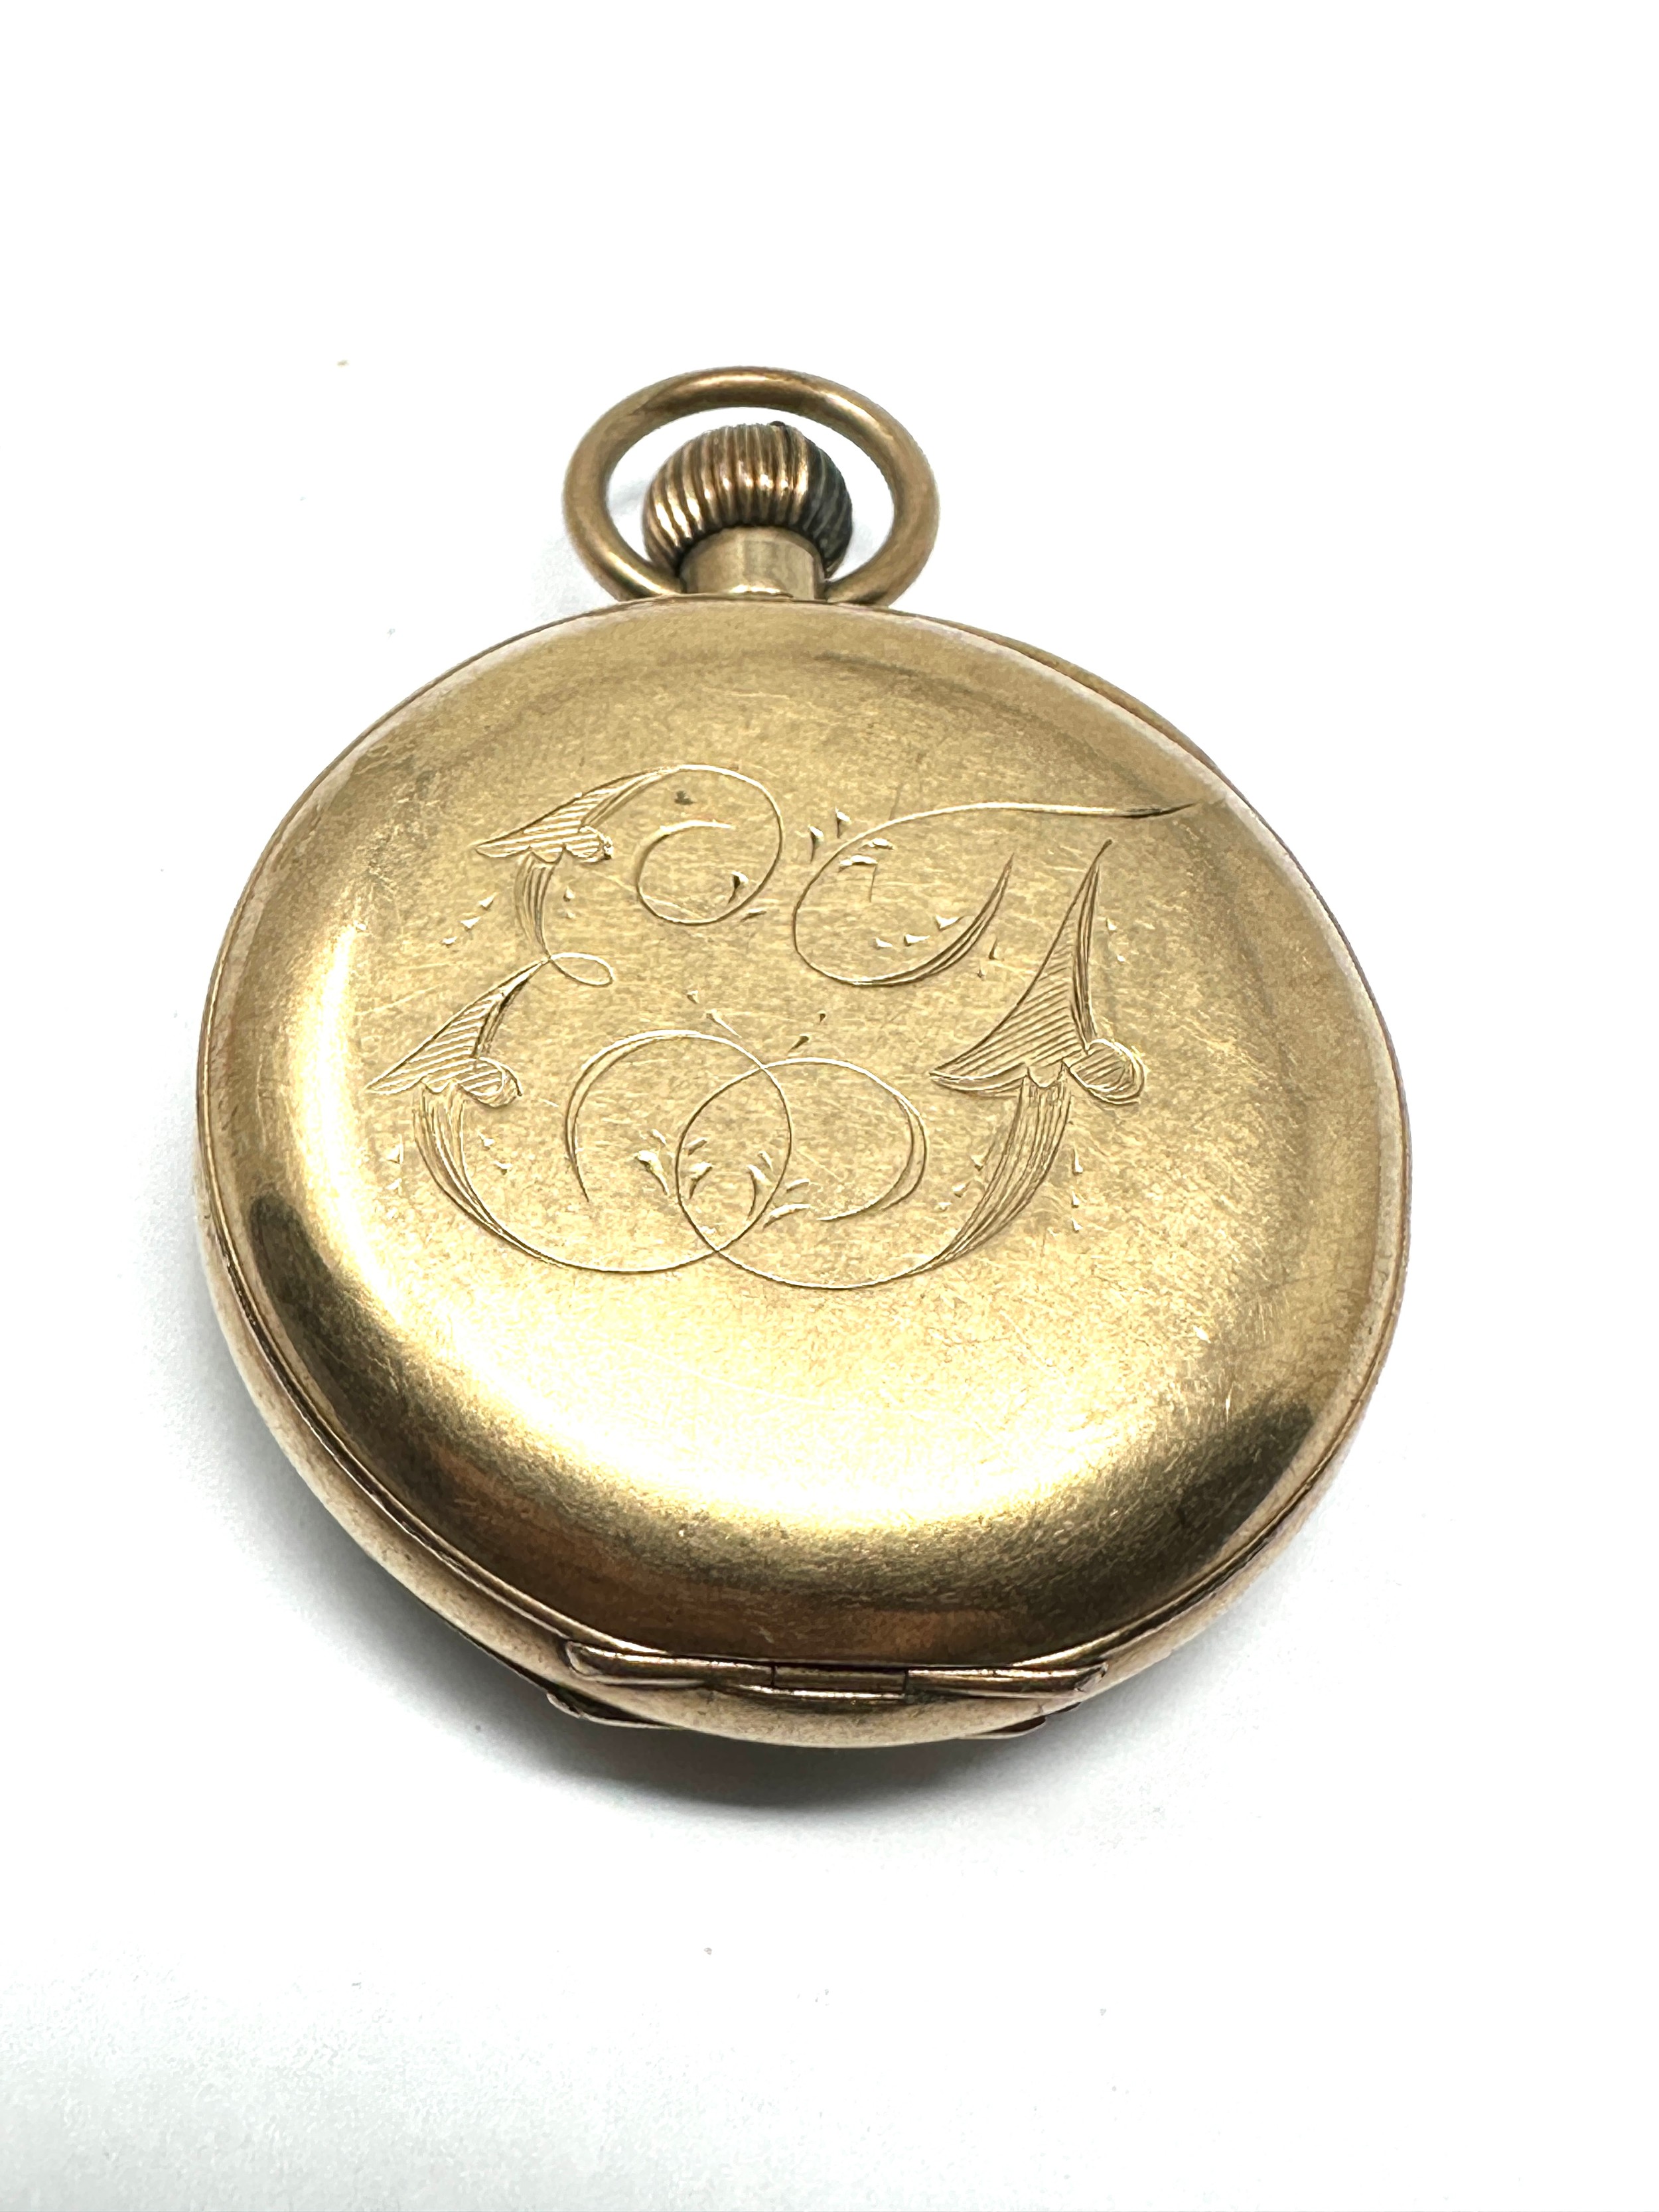 Vintage Small Size Rolled Gold Open Face Pocket Watch Hand-wind Working - Image 2 of 3